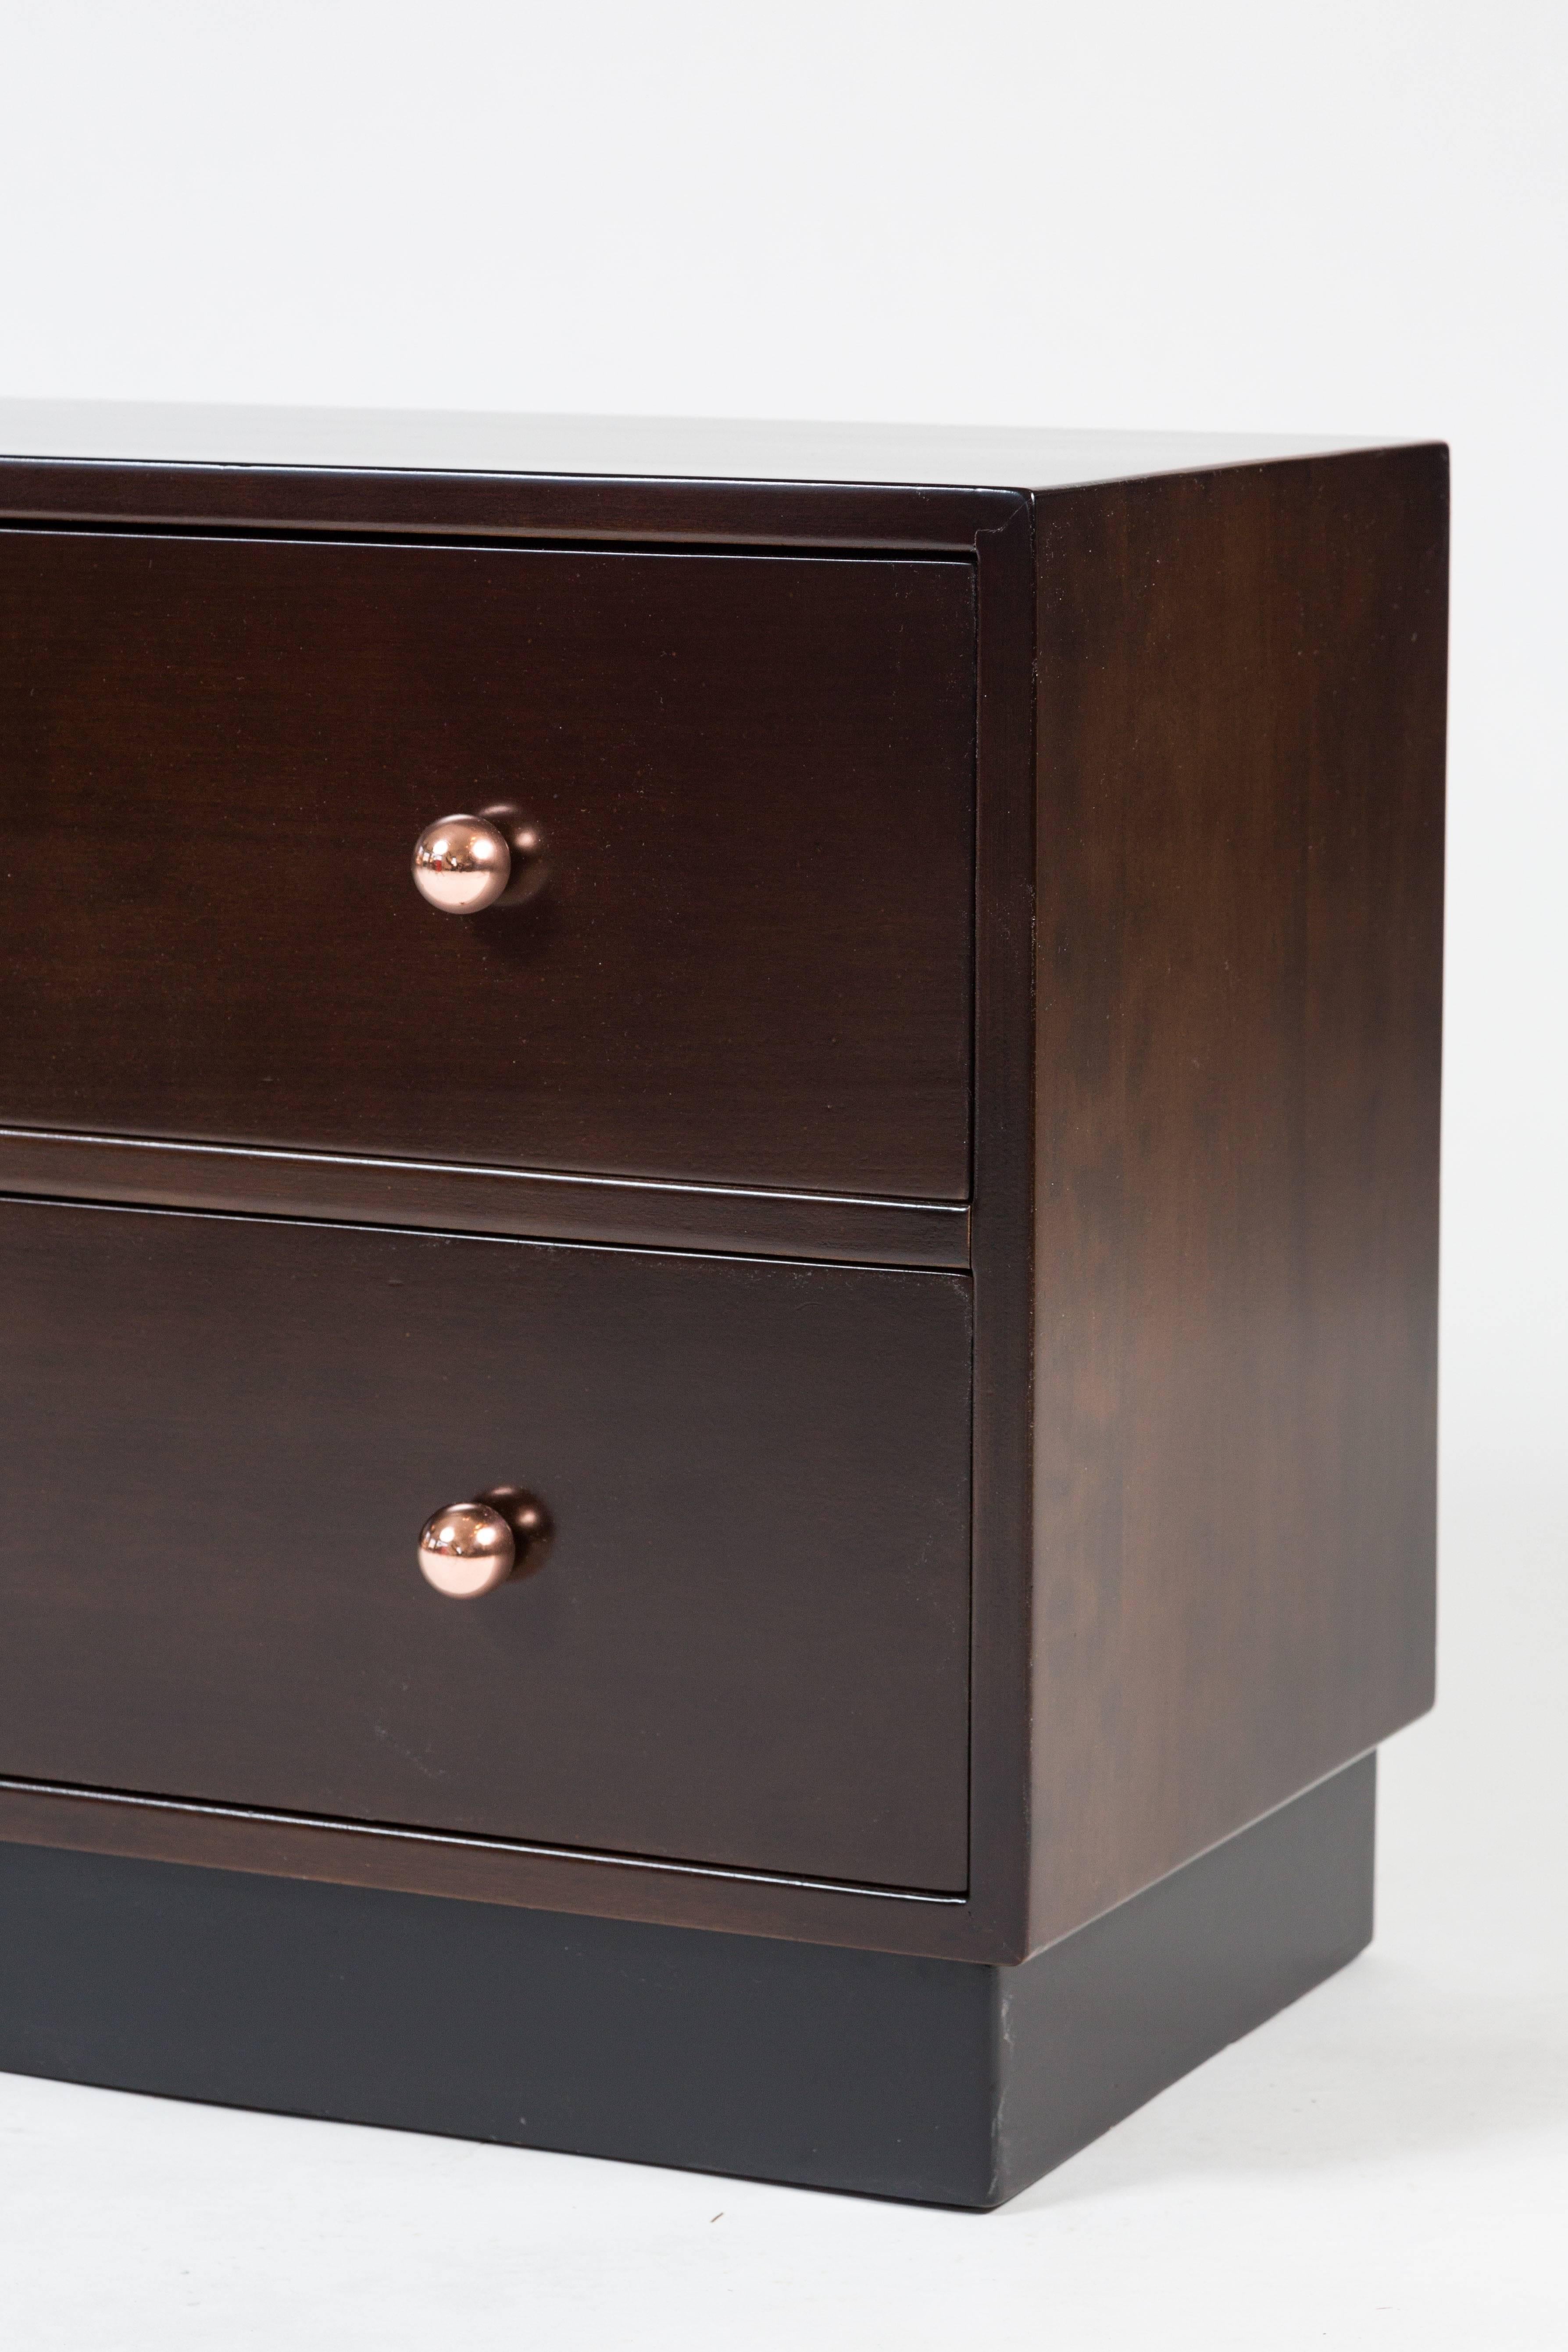 American Pair of Two-Drawer Bedside Chests 